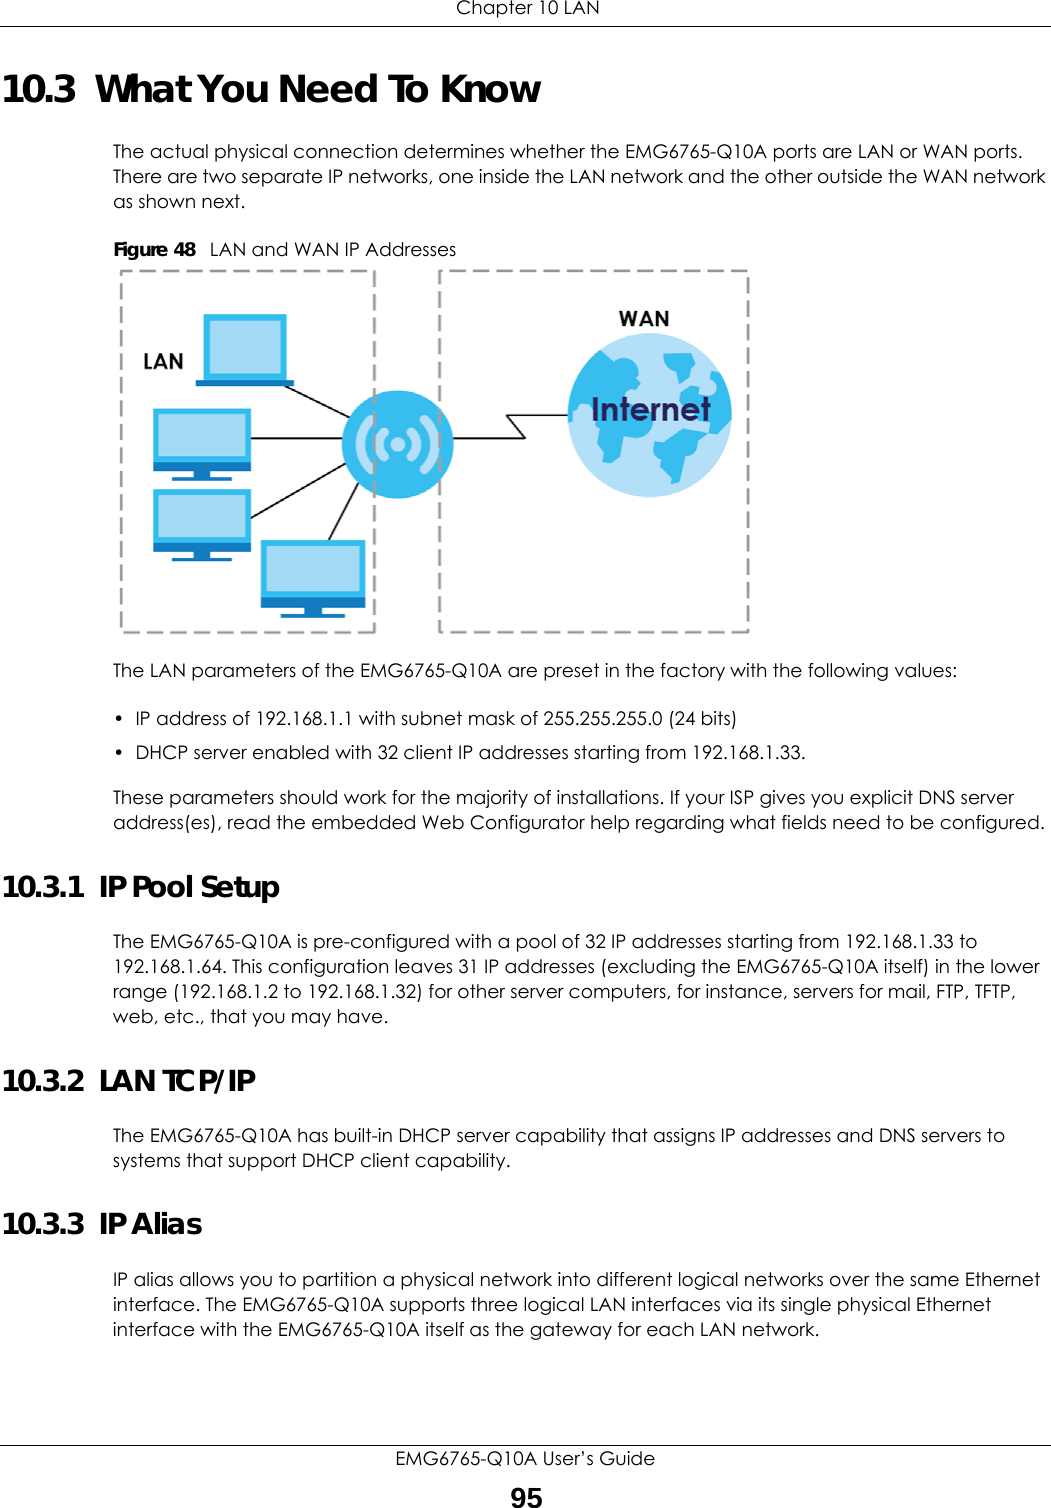  Chapter 10 LANEMG6765-Q10A User’s Guide9510.3  What You Need To KnowThe actual physical connection determines whether the EMG6765-Q10A ports are LAN or WAN ports. There are two separate IP networks, one inside the LAN network and the other outside the WAN network as shown next.Figure 48   LAN and WAN IP AddressesThe LAN parameters of the EMG6765-Q10A are preset in the factory with the following values:• IP address of 192.168.1.1 with subnet mask of 255.255.255.0 (24 bits)• DHCP server enabled with 32 client IP addresses starting from 192.168.1.33. These parameters should work for the majority of installations. If your ISP gives you explicit DNS server address(es), read the embedded Web Configurator help regarding what fields need to be configured.10.3.1  IP Pool SetupThe EMG6765-Q10A is pre-configured with a pool of 32 IP addresses starting from 192.168.1.33 to 192.168.1.64. This configuration leaves 31 IP addresses (excluding the EMG6765-Q10A itself) in the lower range (192.168.1.2 to 192.168.1.32) for other server computers, for instance, servers for mail, FTP, TFTP, web, etc., that you may have.10.3.2  LAN TCP/IP The EMG6765-Q10A has built-in DHCP server capability that assigns IP addresses and DNS servers to systems that support DHCP client capability.10.3.3  IP AliasIP alias allows you to partition a physical network into different logical networks over the same Ethernet interface. The EMG6765-Q10A supports three logical LAN interfaces via its single physical Ethernet interface with the EMG6765-Q10A itself as the gateway for each LAN network.